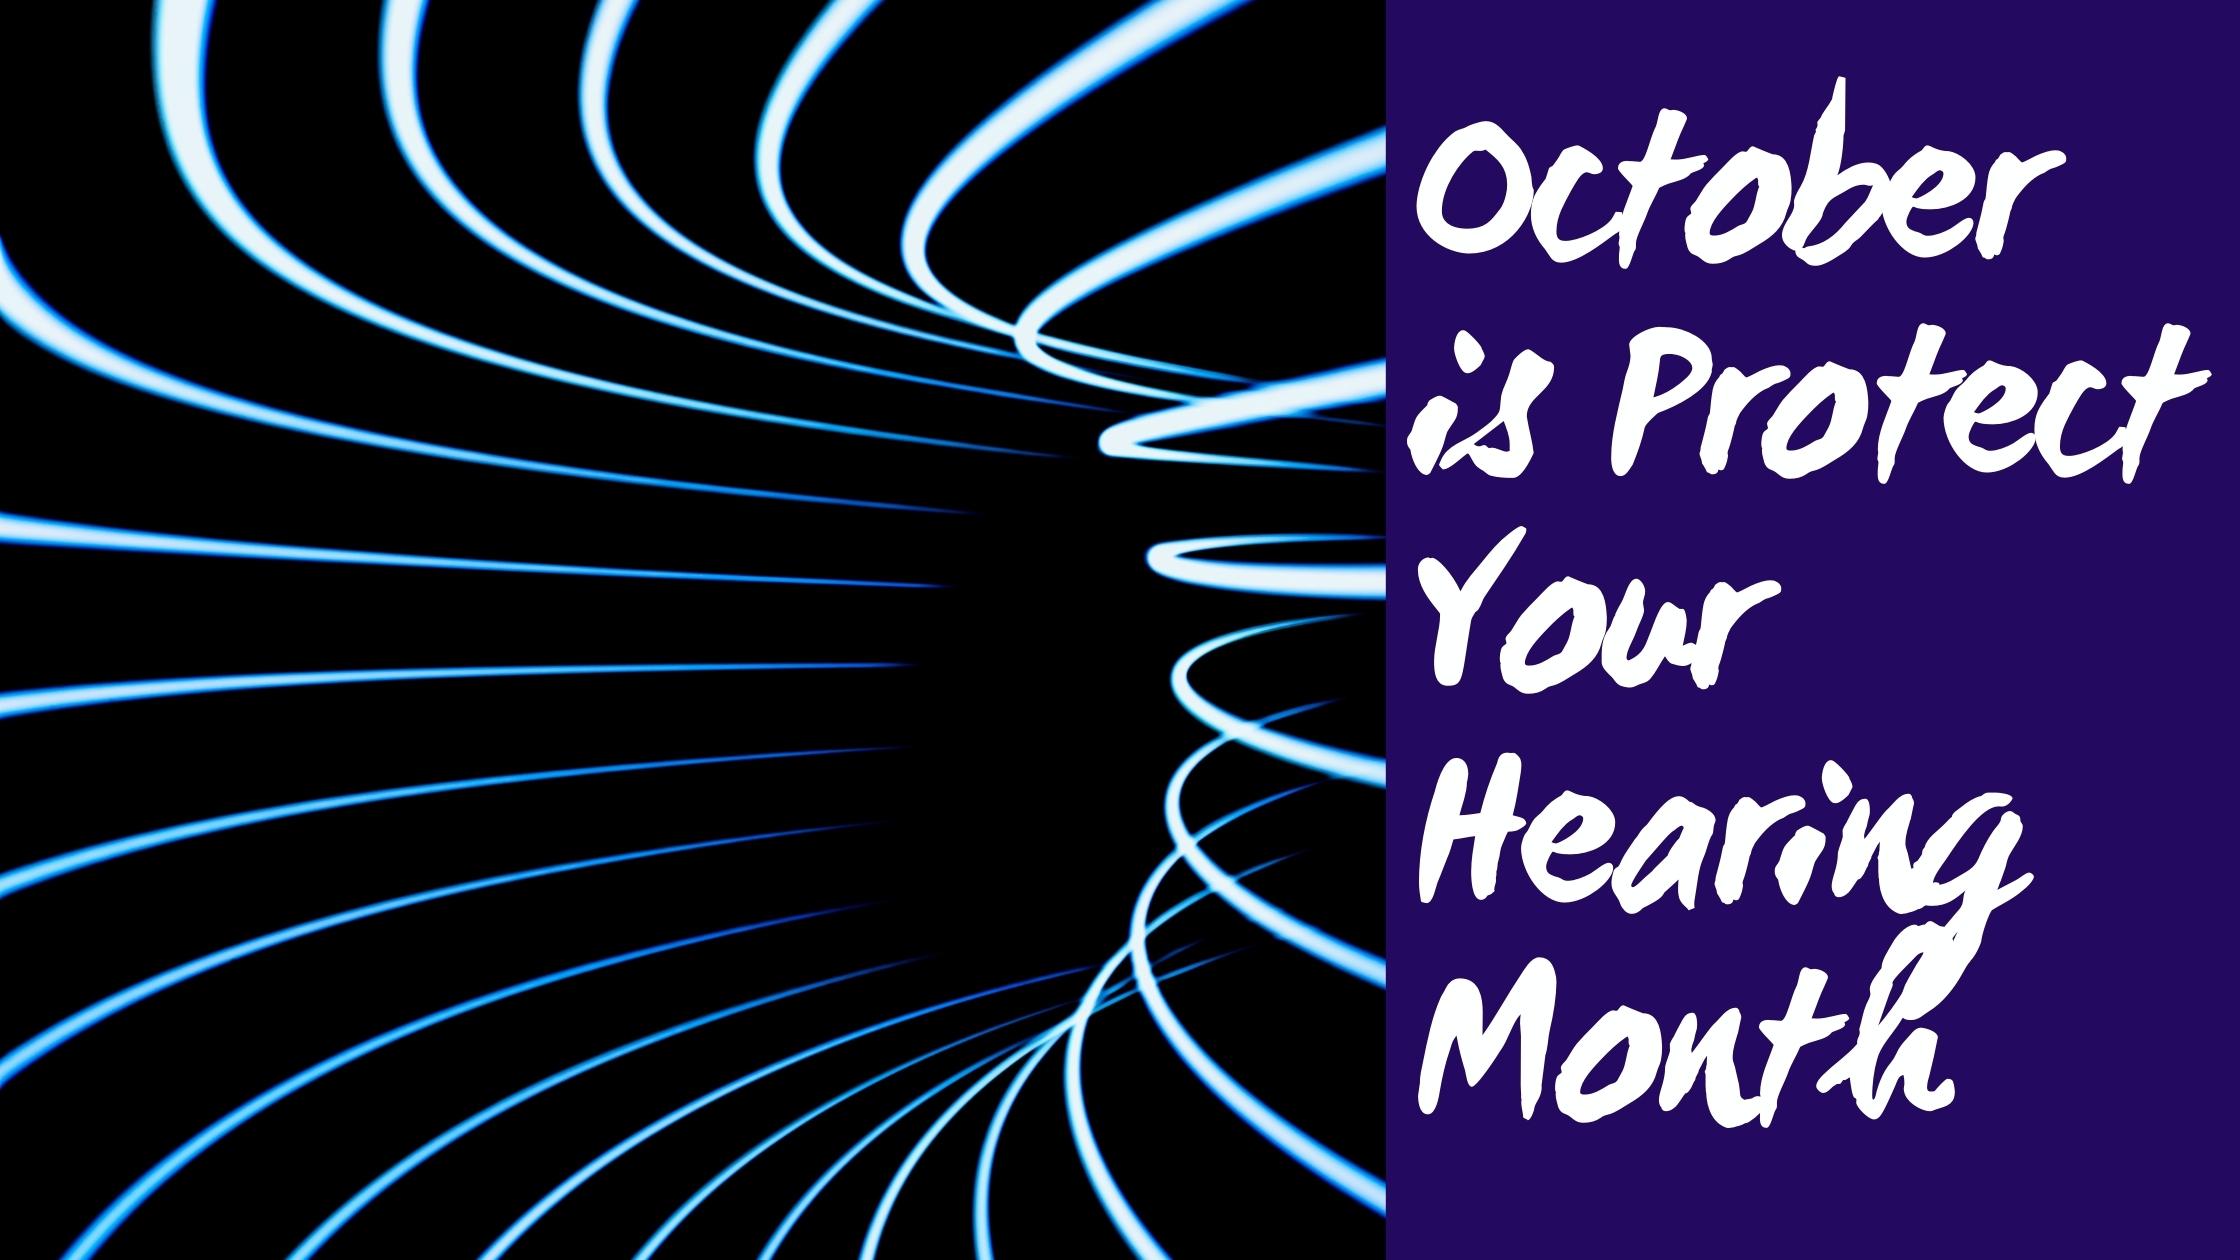 Featured image for “October is Protect Your Hearing Month”